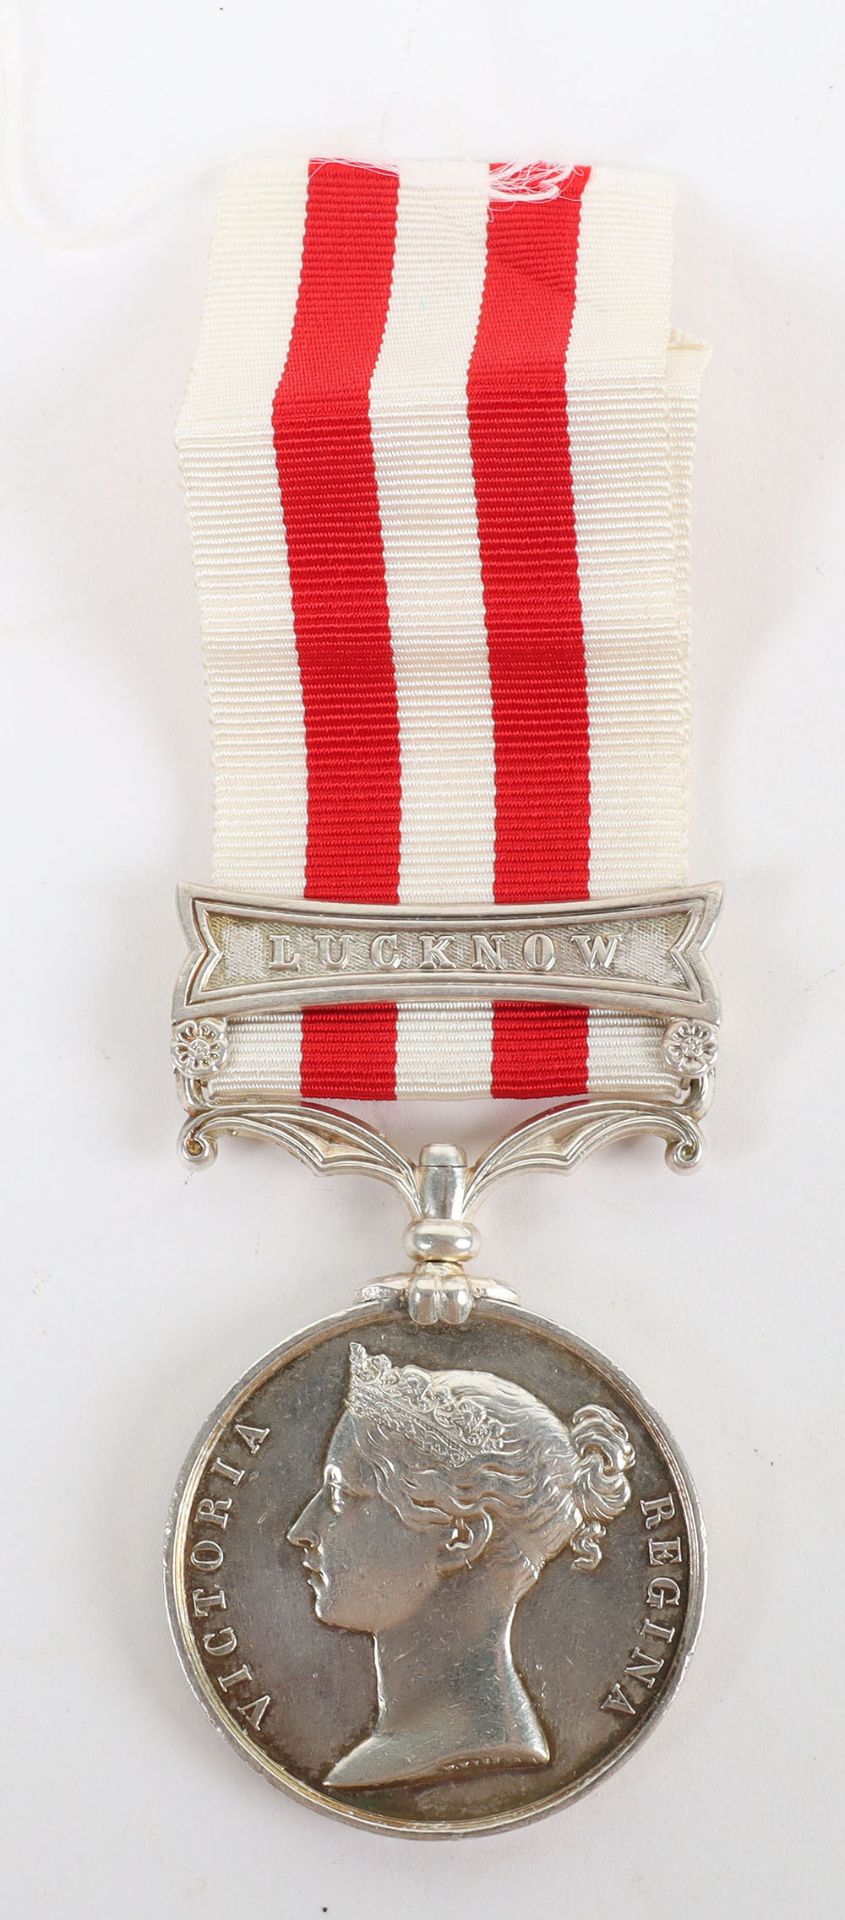 Rare Indian Mutiny Medal to a Sergeant Major in the Bengal Artillery who was Specially Promoted to E